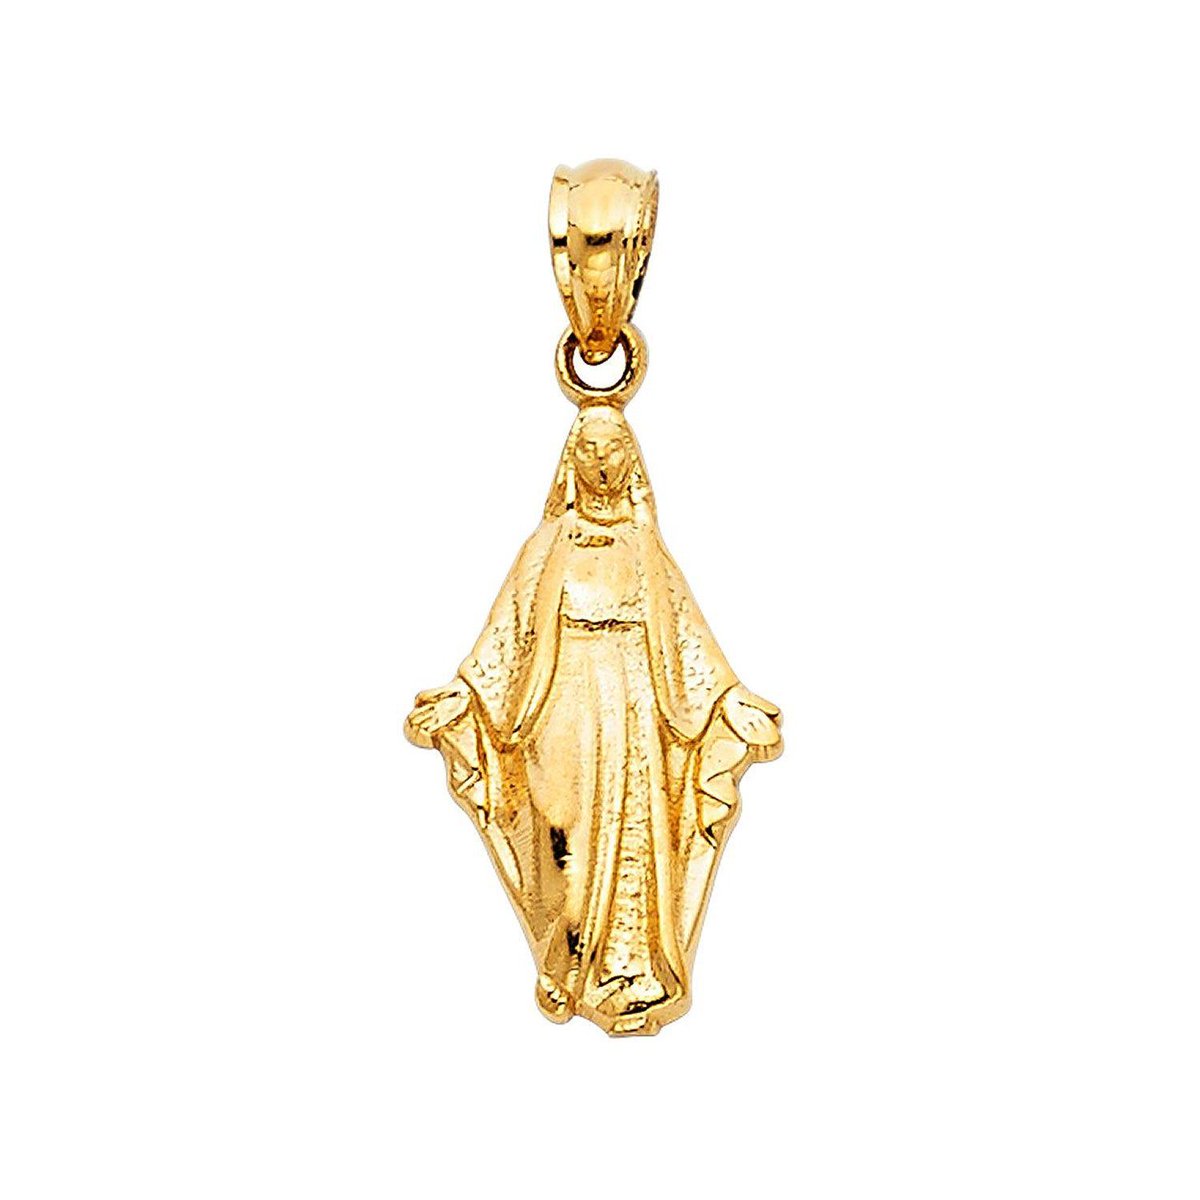 Crowning of Mary buff.ly/3wfOYzT 

#luxsalvejewelry #virginmarypendant #goldjewelry #catholicgifts